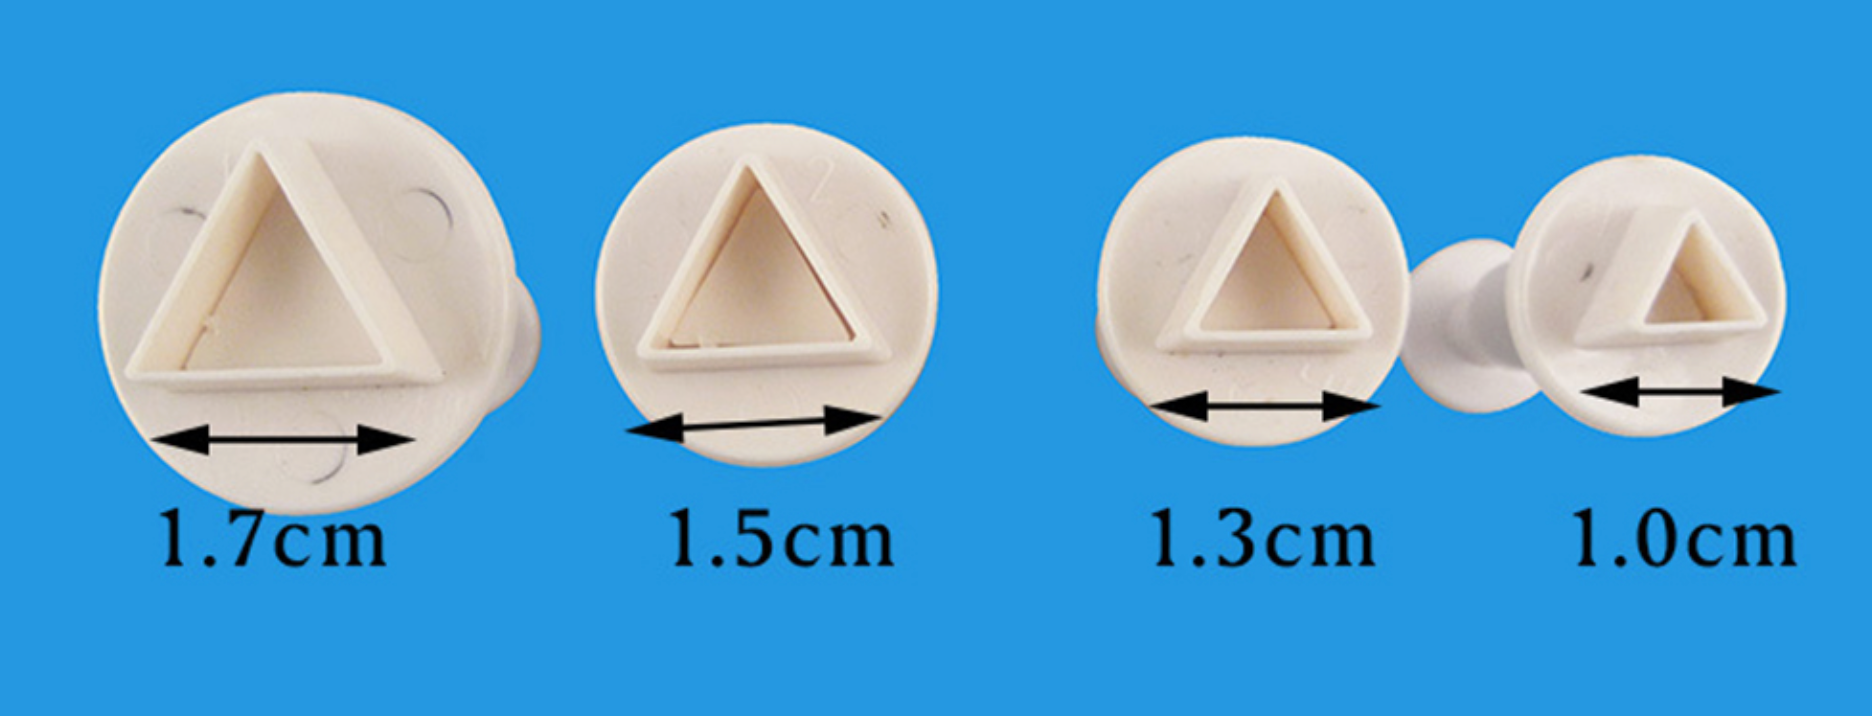 Mini Triangle Plunger Cutters Set of 4 graduated sizes for polymer clay - Polymer Clay TV tutorial and supplies